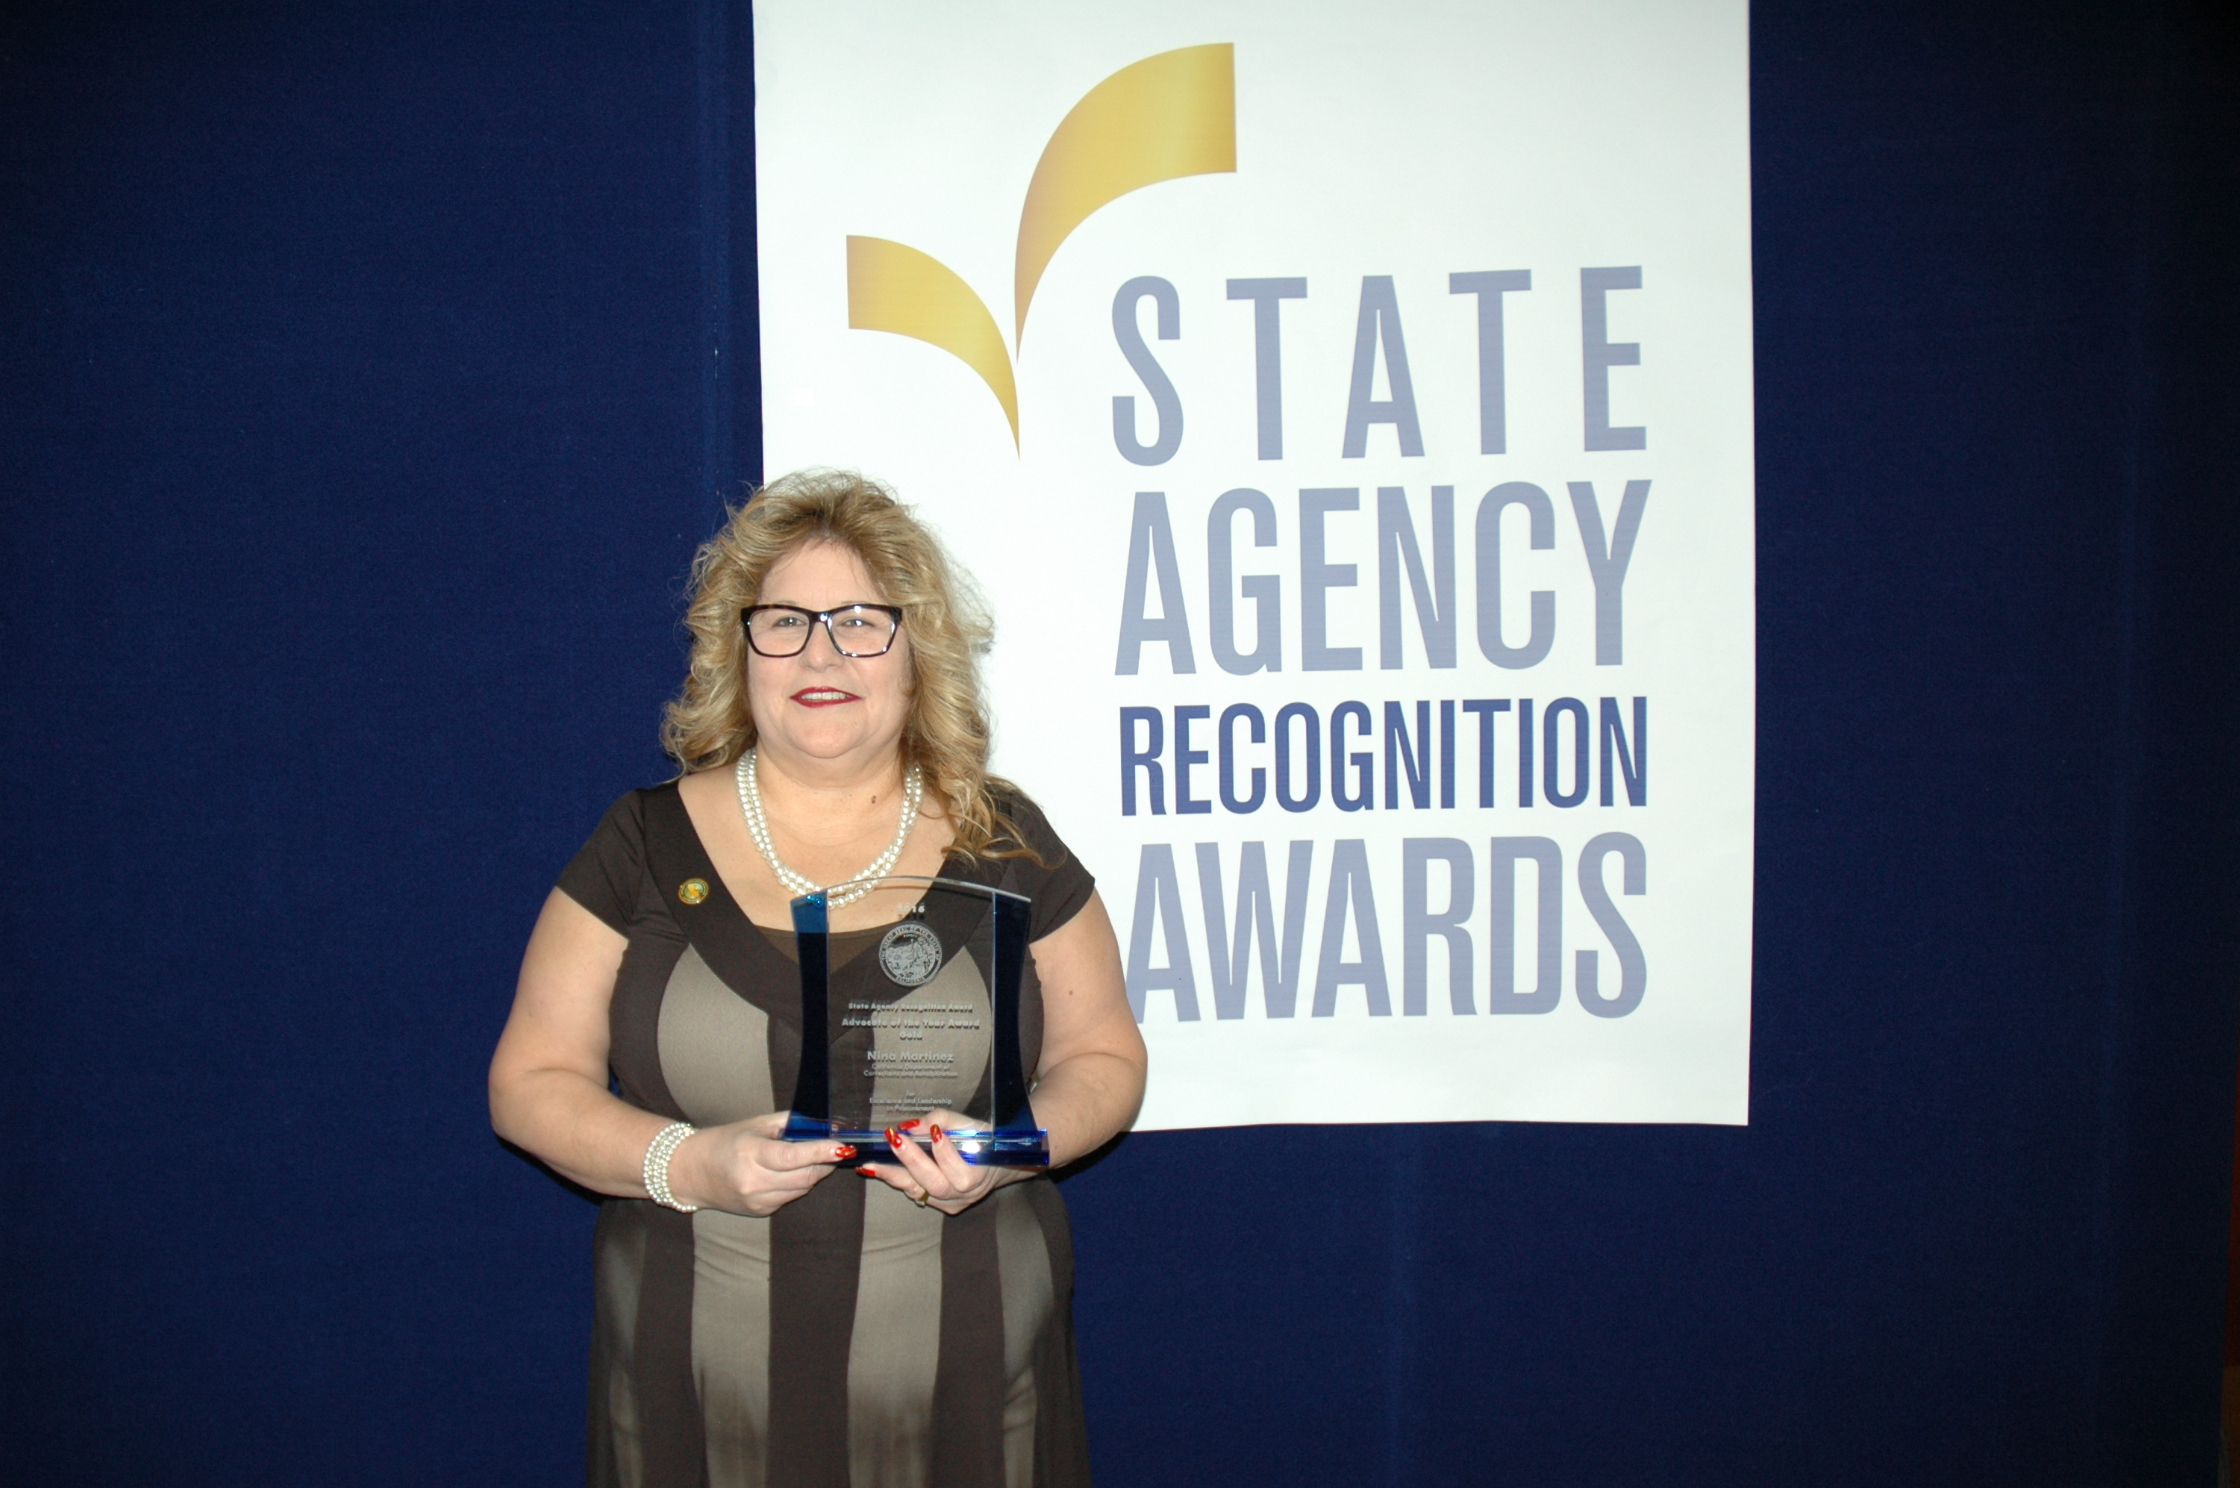 Nina Martinez, California department of corrections and rehabilitation, accepts the Gold advocate of the year award